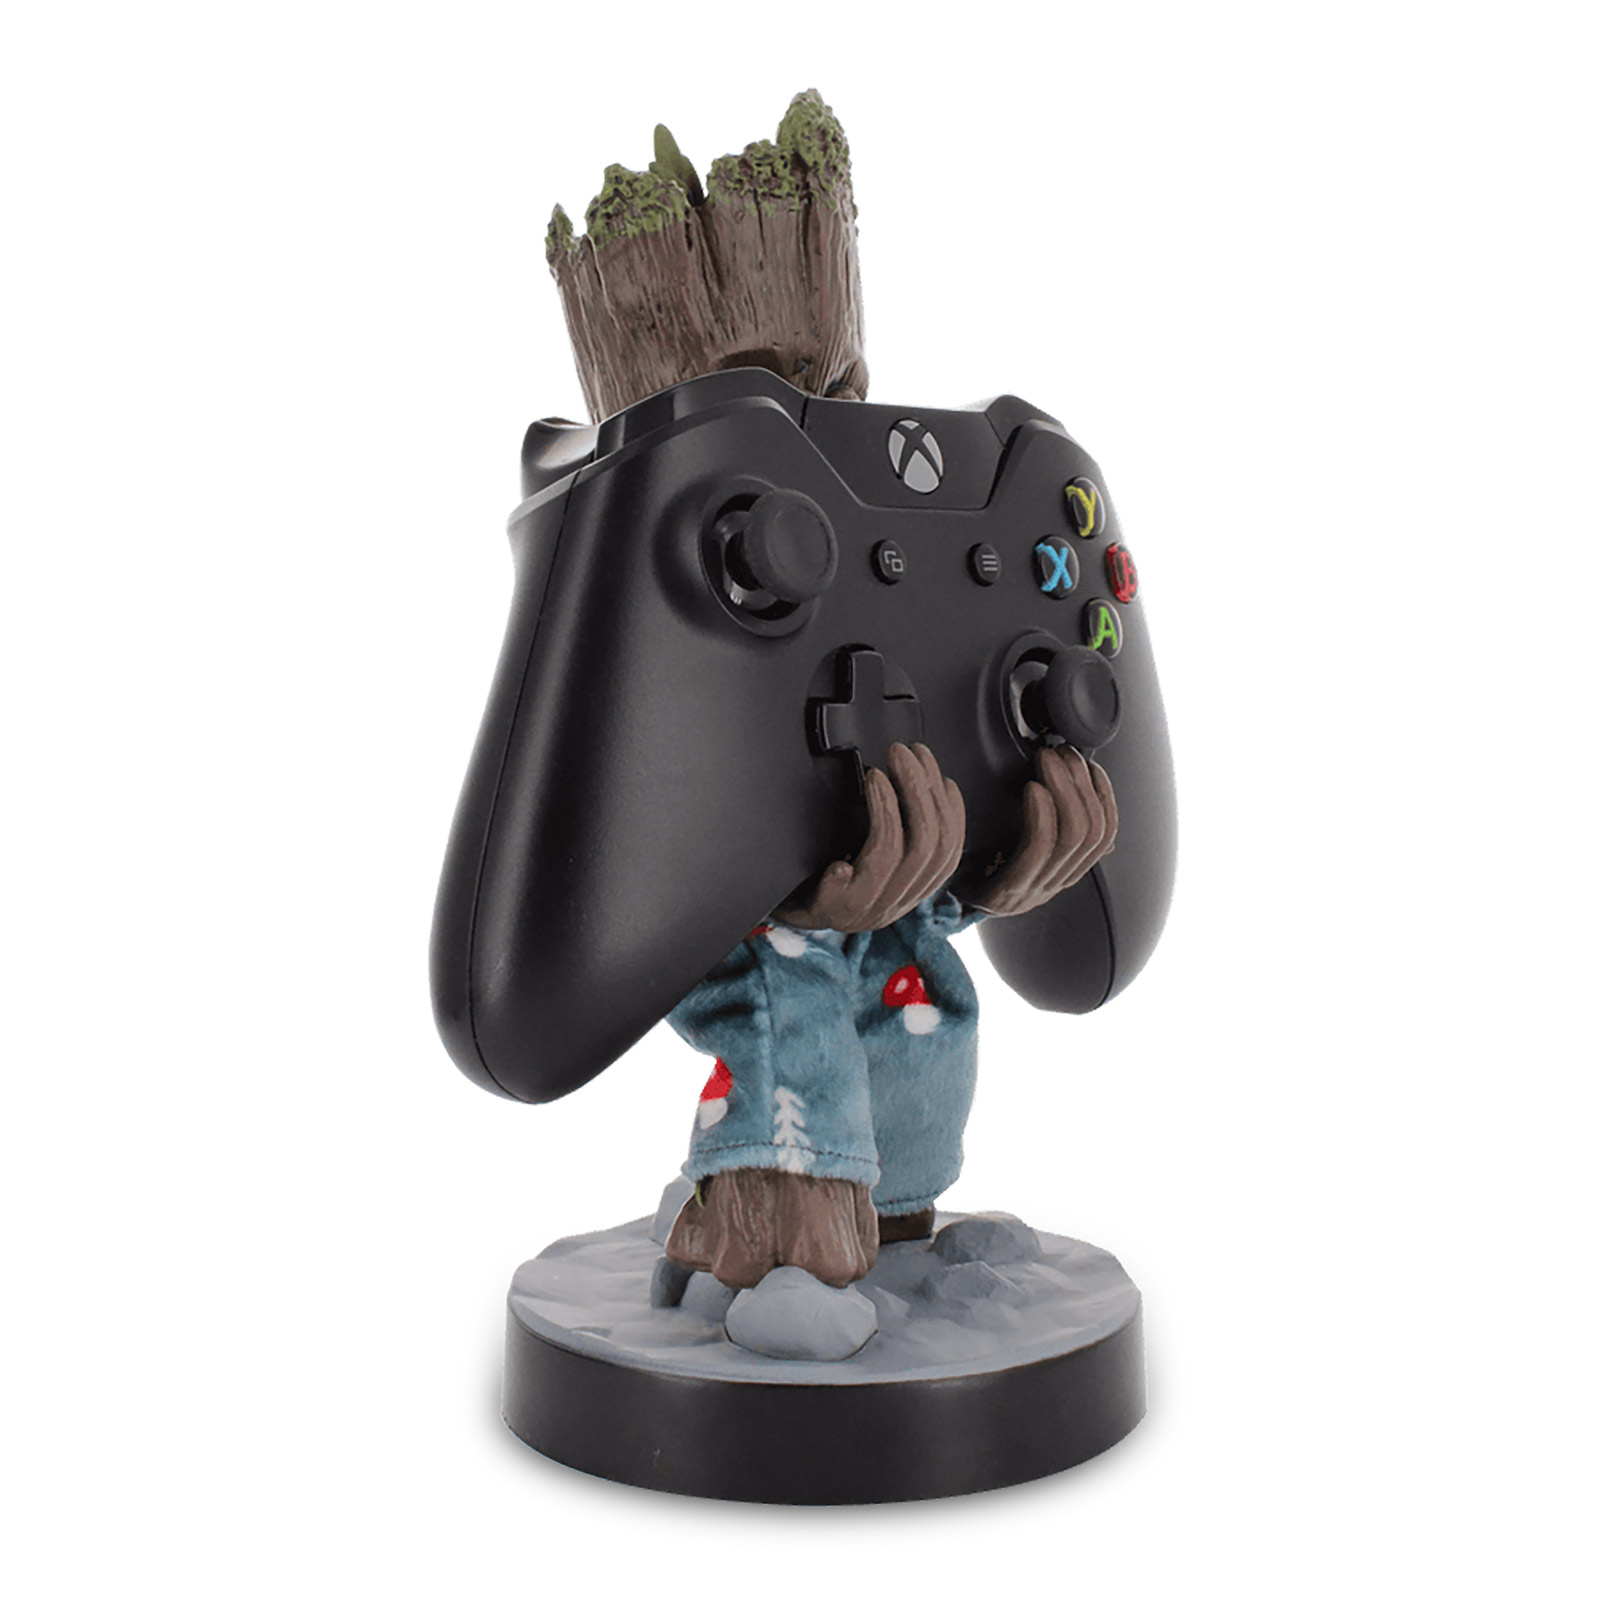 Guardians of the Galaxy - Pyjama Groot Cable Guy Figure